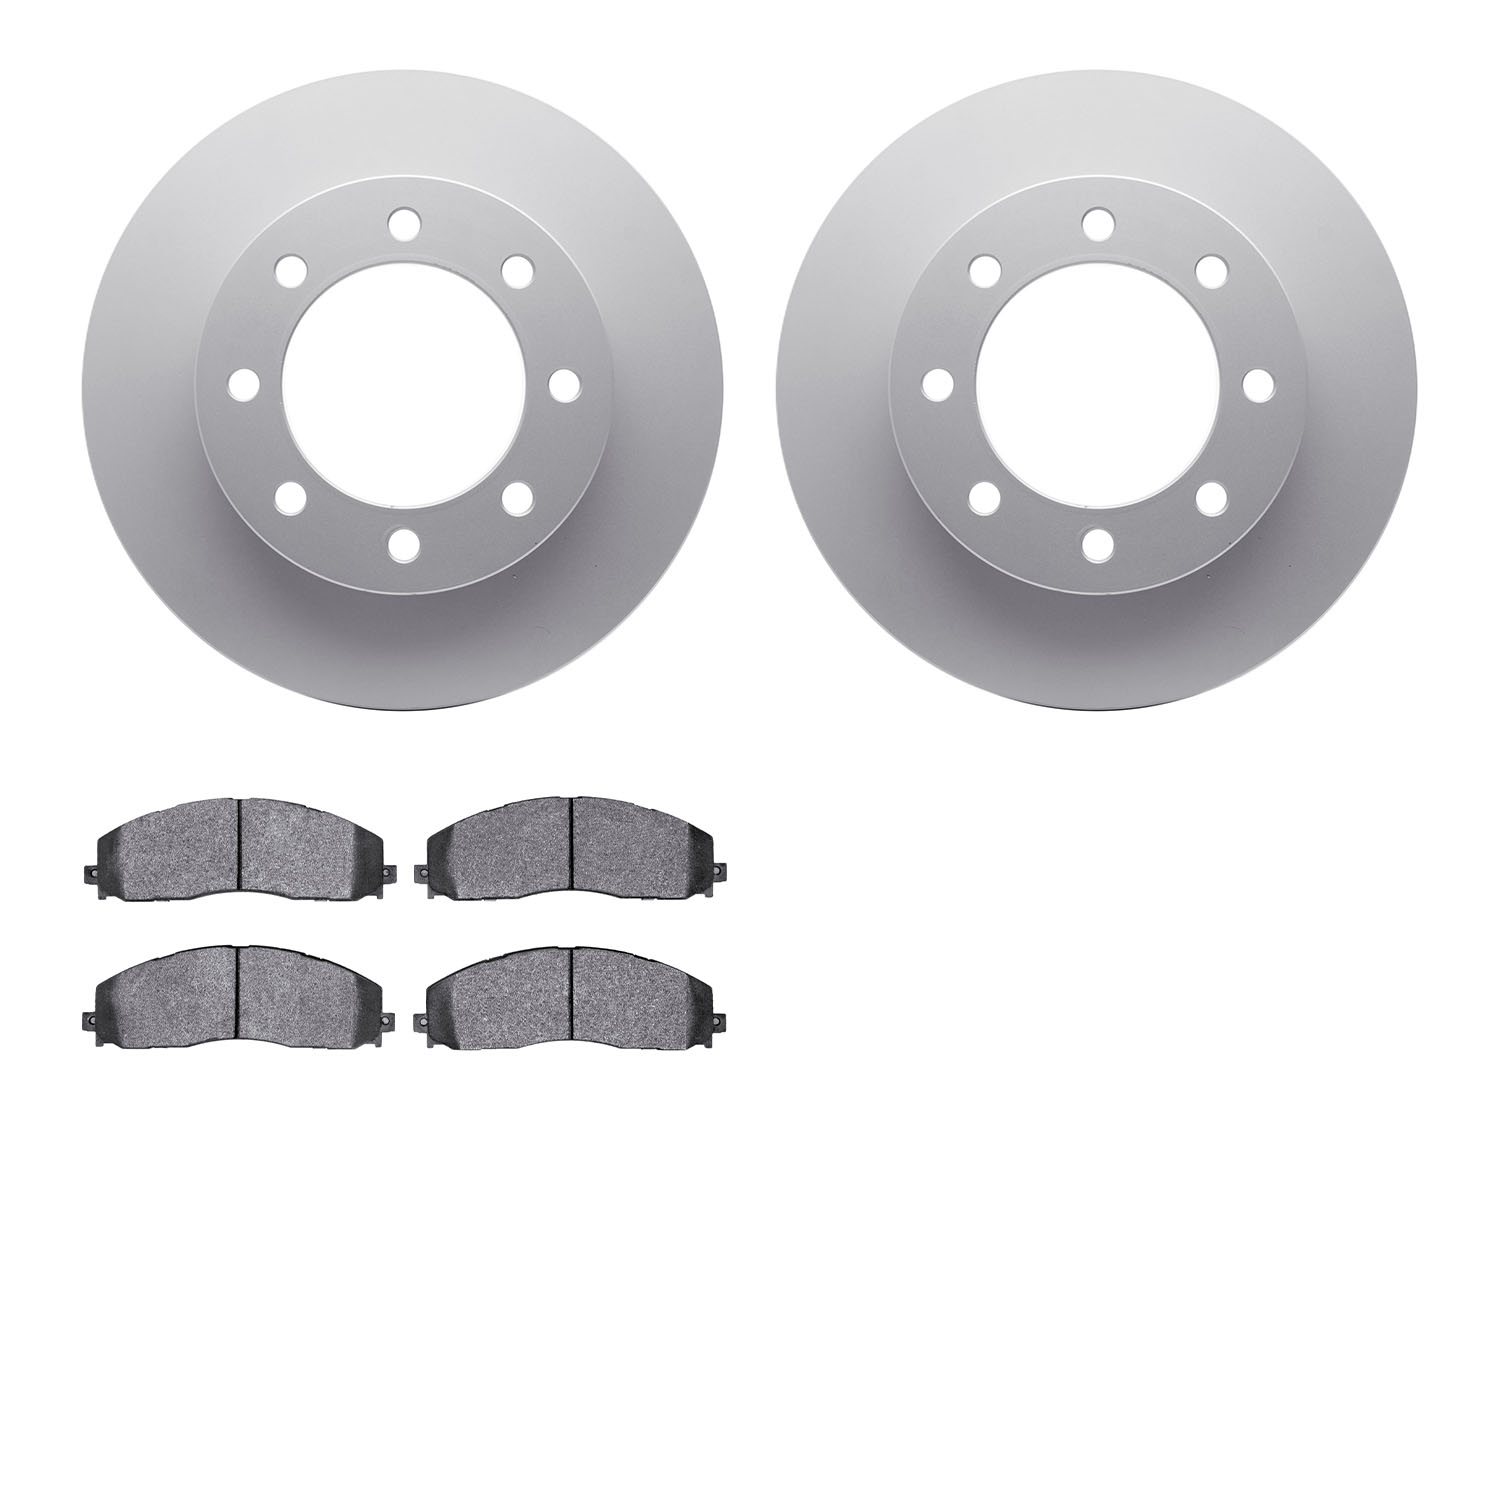 4202-99191 Geospec Brake Rotors w/Heavy-Duty Brake Pads Kit, Fits Select Ford/Lincoln/Mercury/Mazda, Position: Front